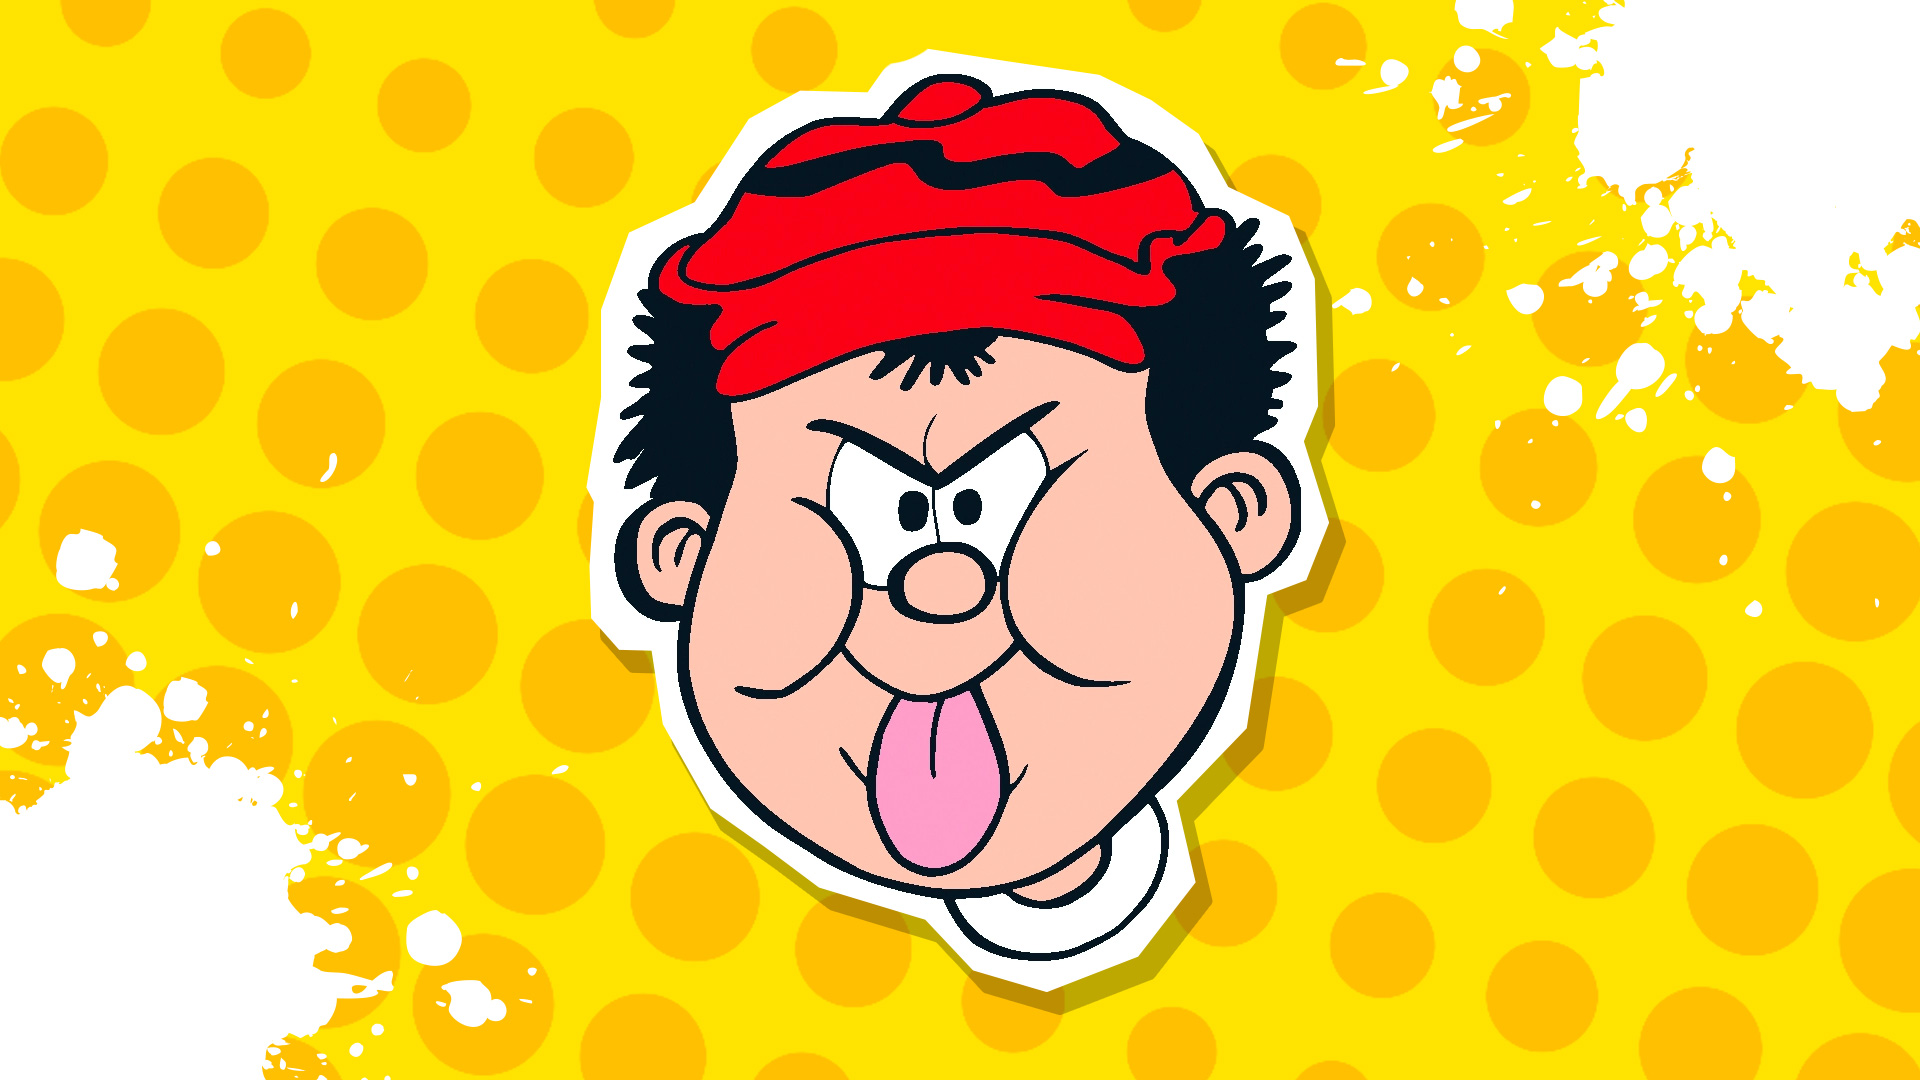 Danny from the Bash Street Kids